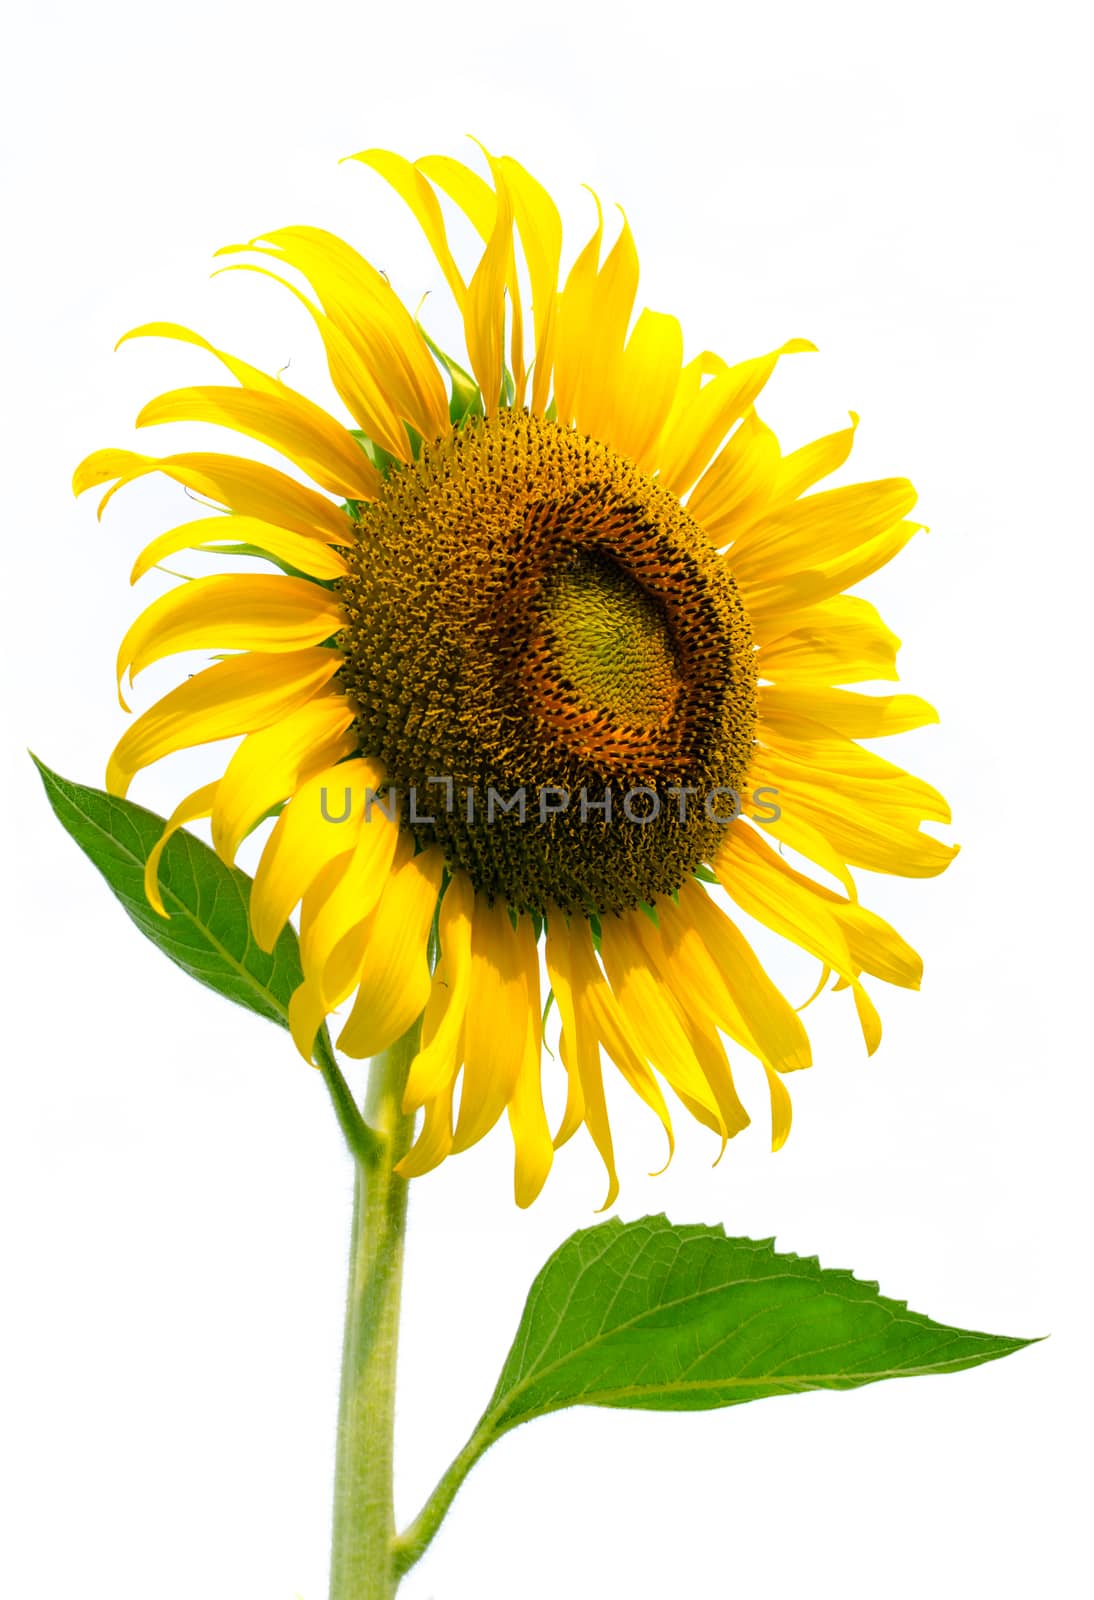 Sunflower by nop16